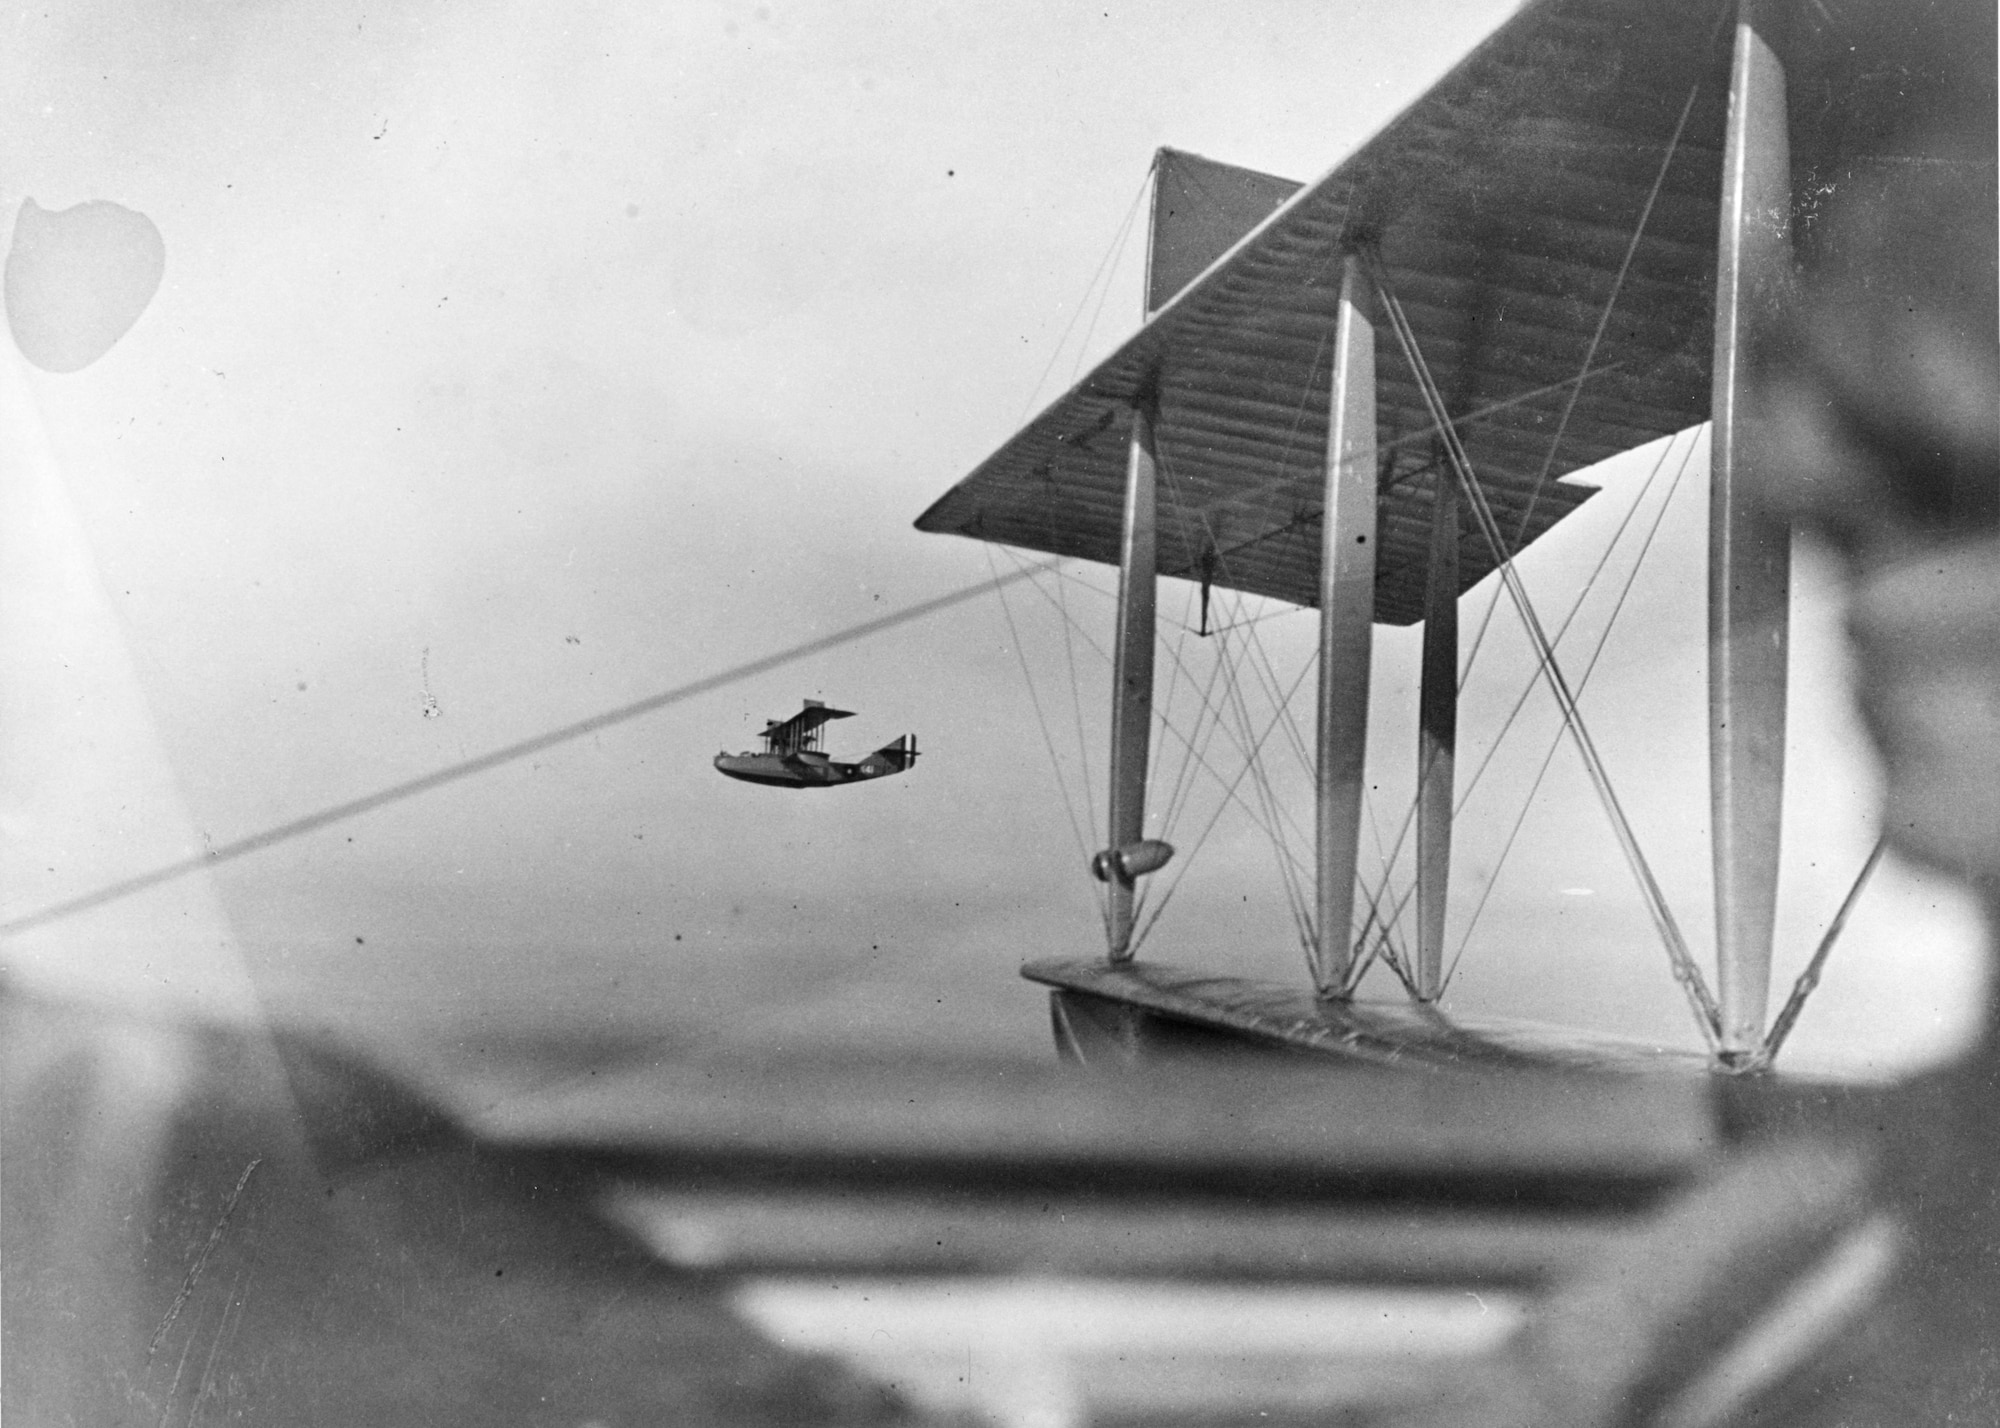 A Curtiss H-16 patrol seaplane on a reconnaissance flight from U.S. Naval Air Station, Killingholm, England, Nov. 06, 1918. (Photo courtesy Naval History and Heritage Command)